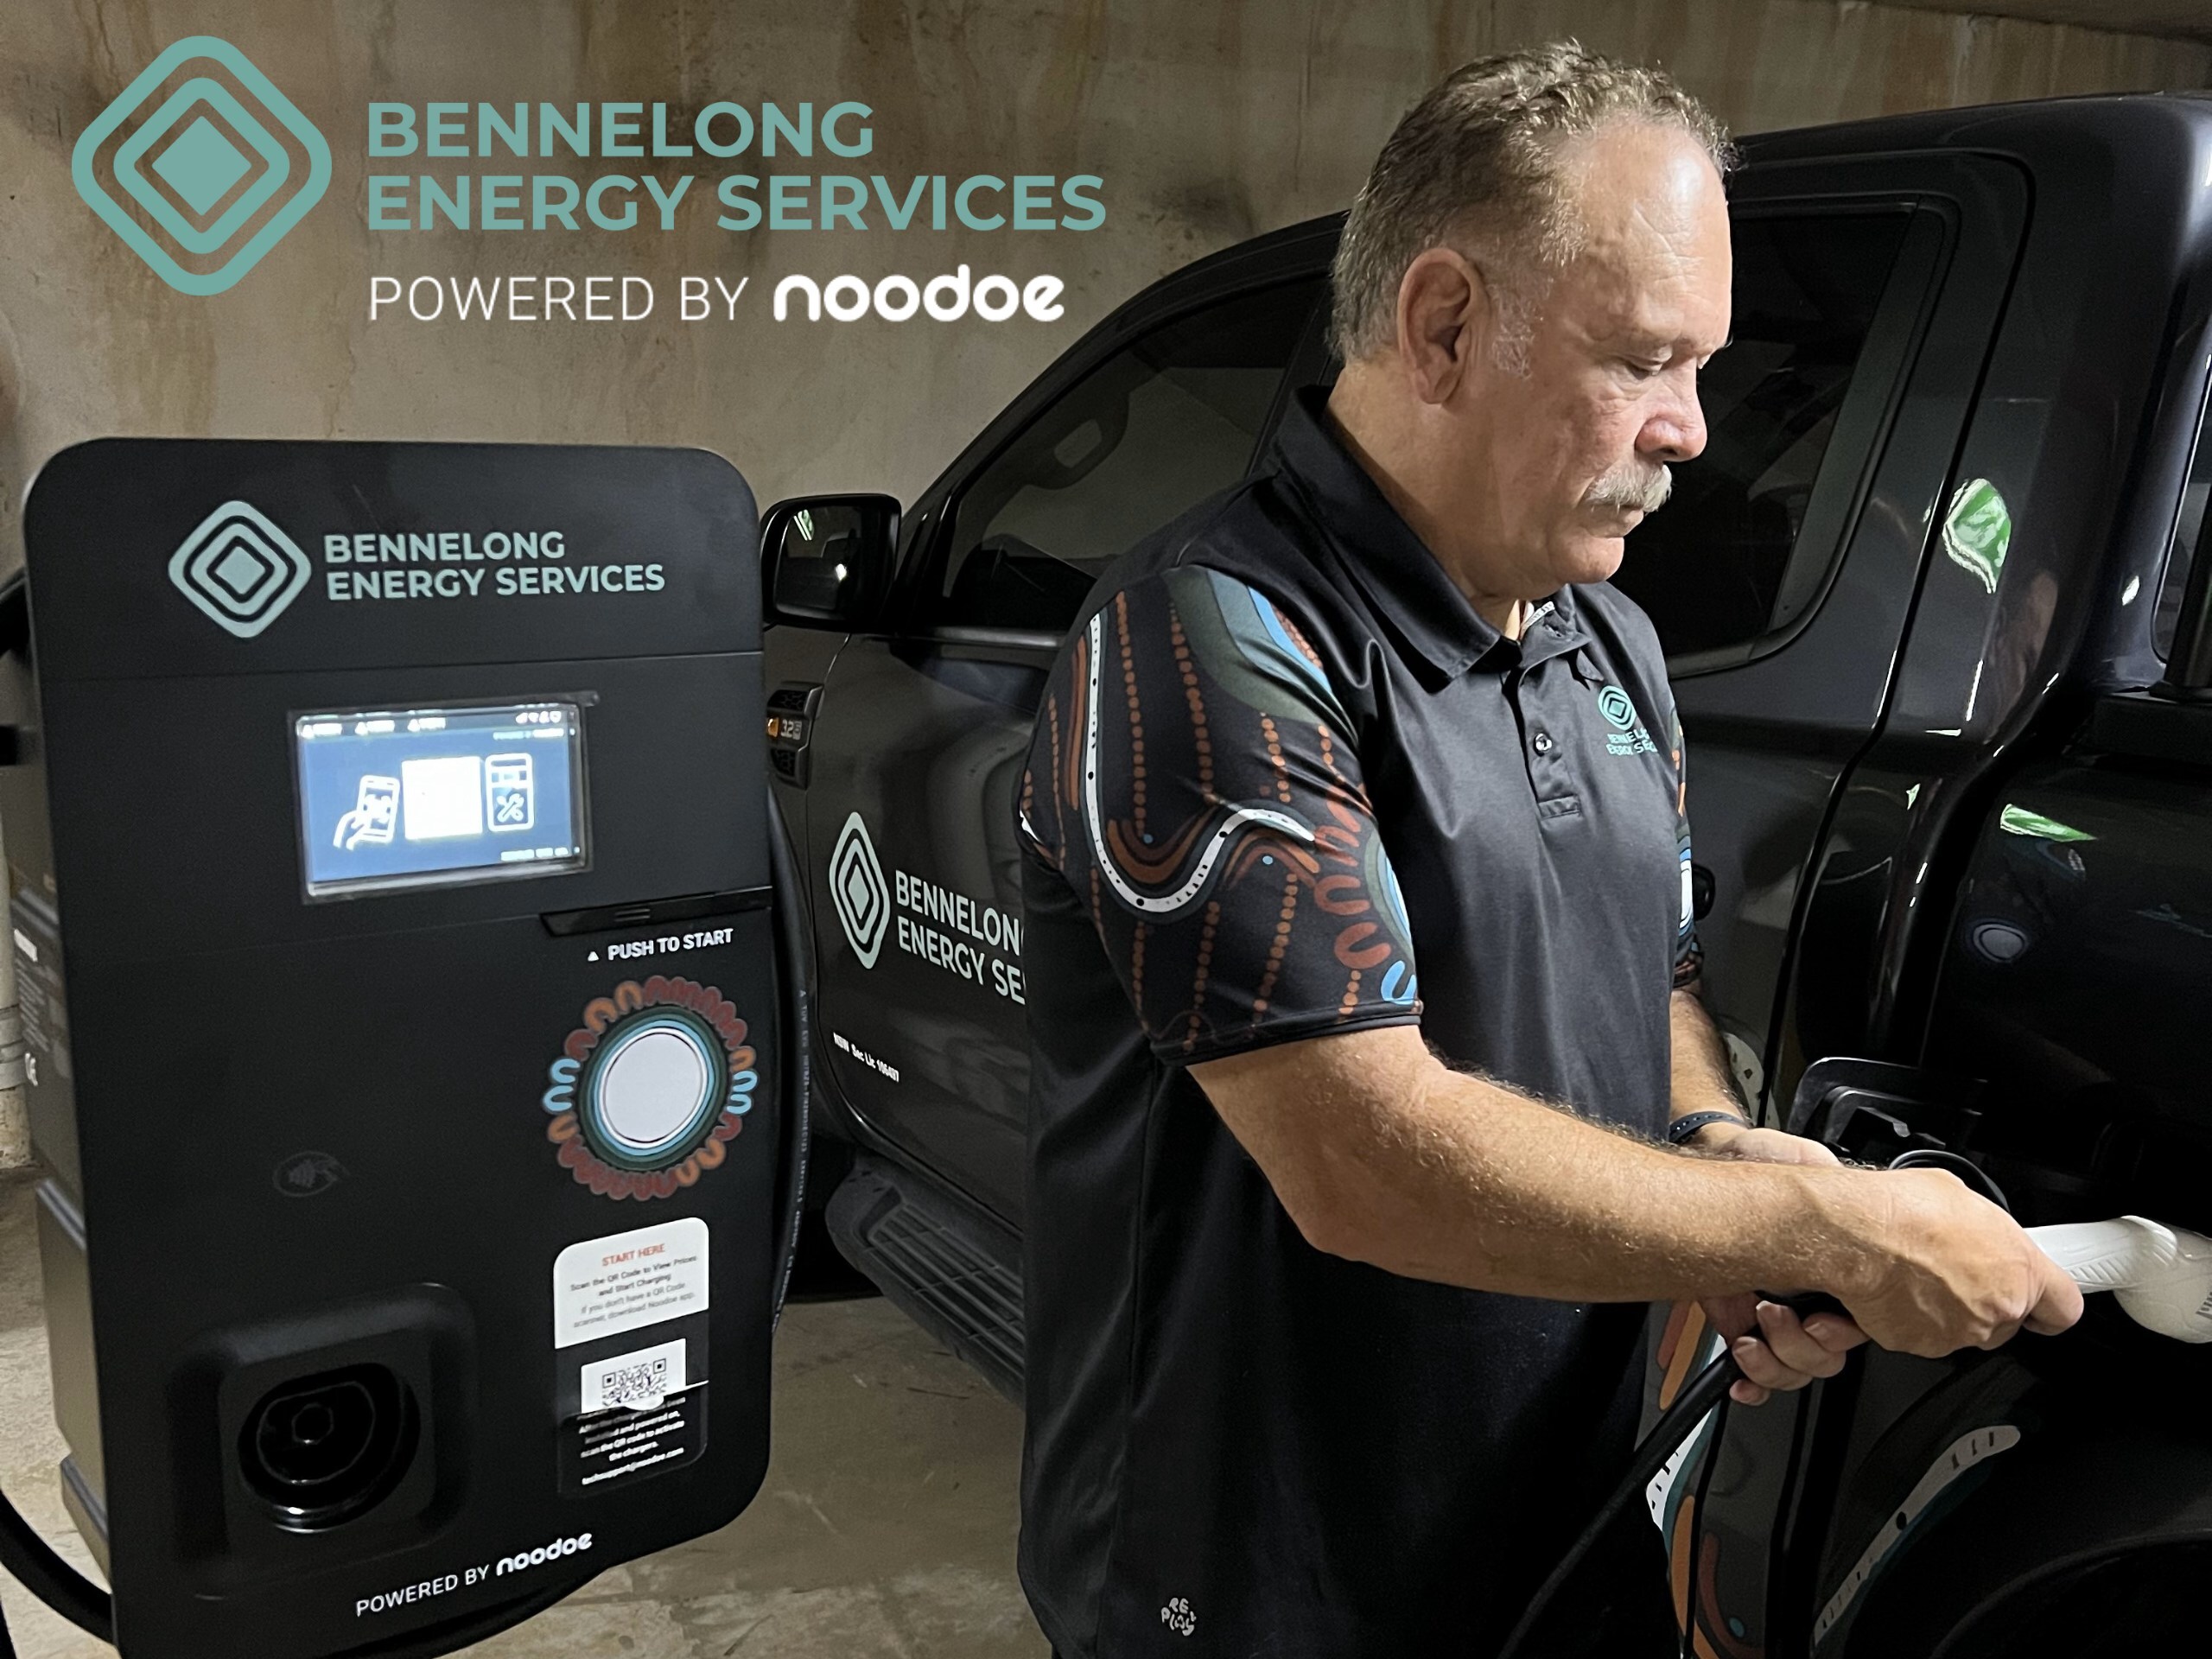 Owner and director of Bennelong Energy Services, Cliff Lyons, using A new Bennelong Energy Services EV charger Powered by Noodoe. Photo: Bennelong Energy Services